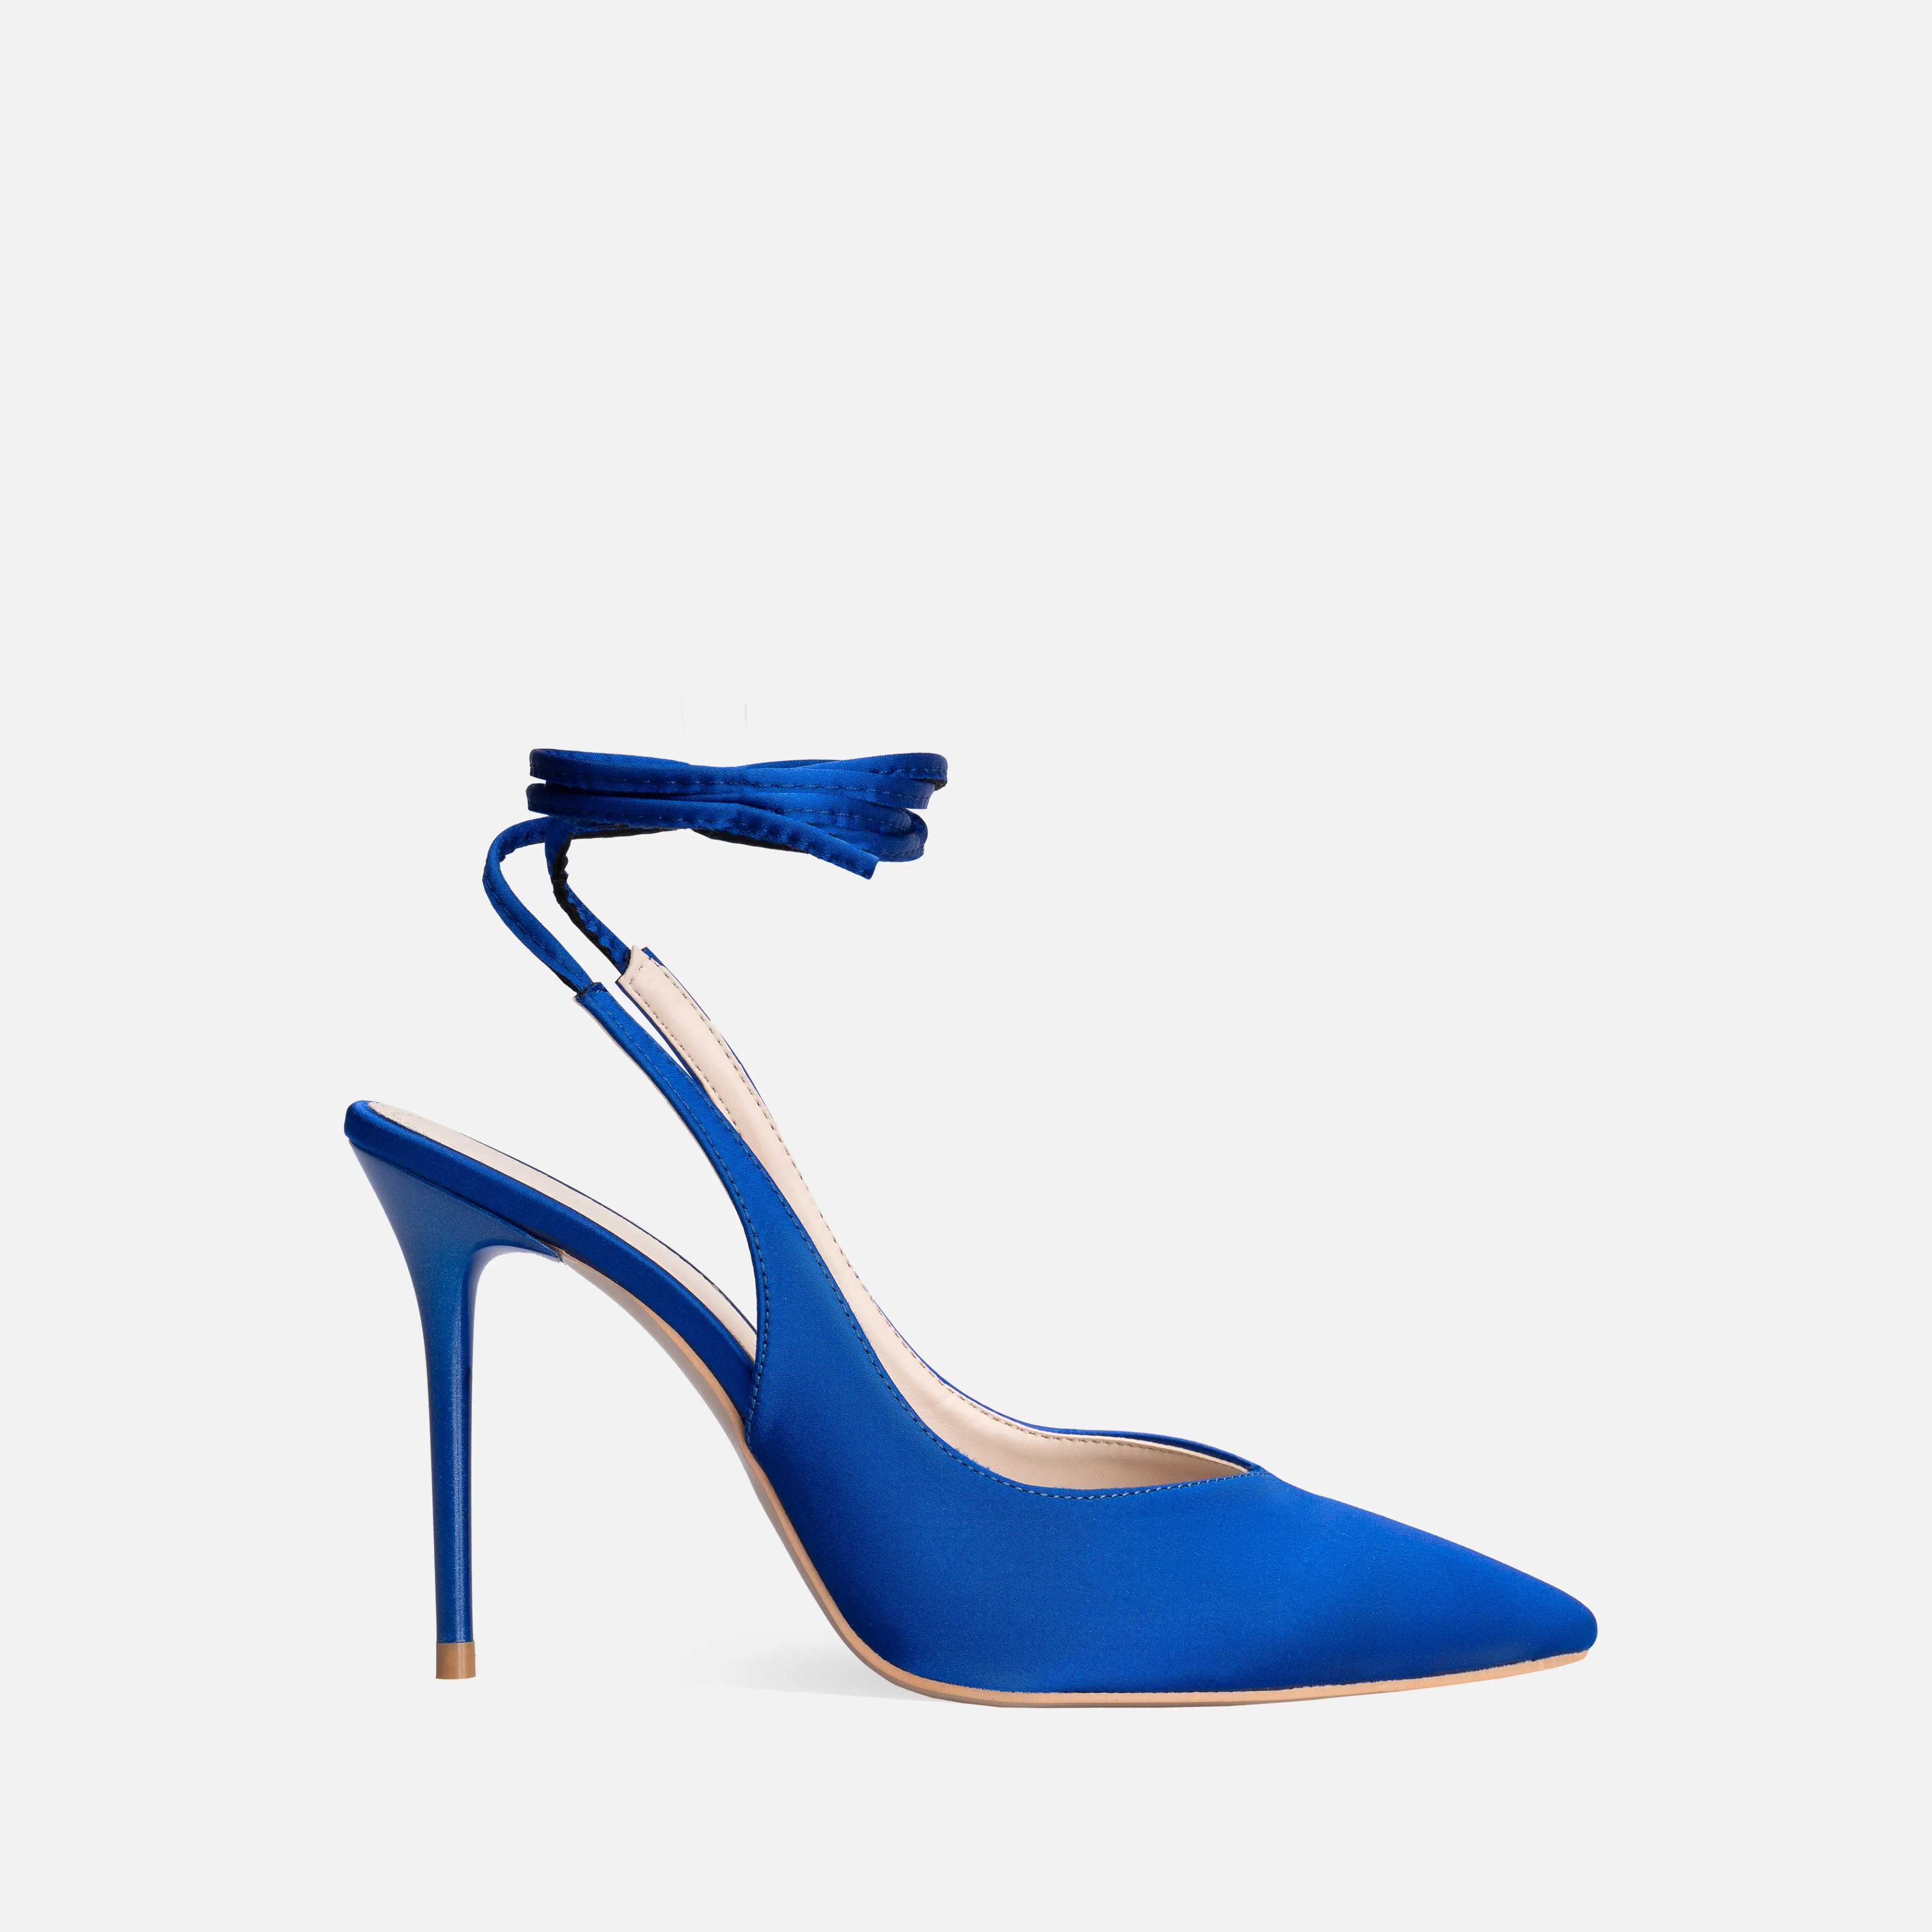 Satin Lace-up Thin High-Heeled Pumps - Blue